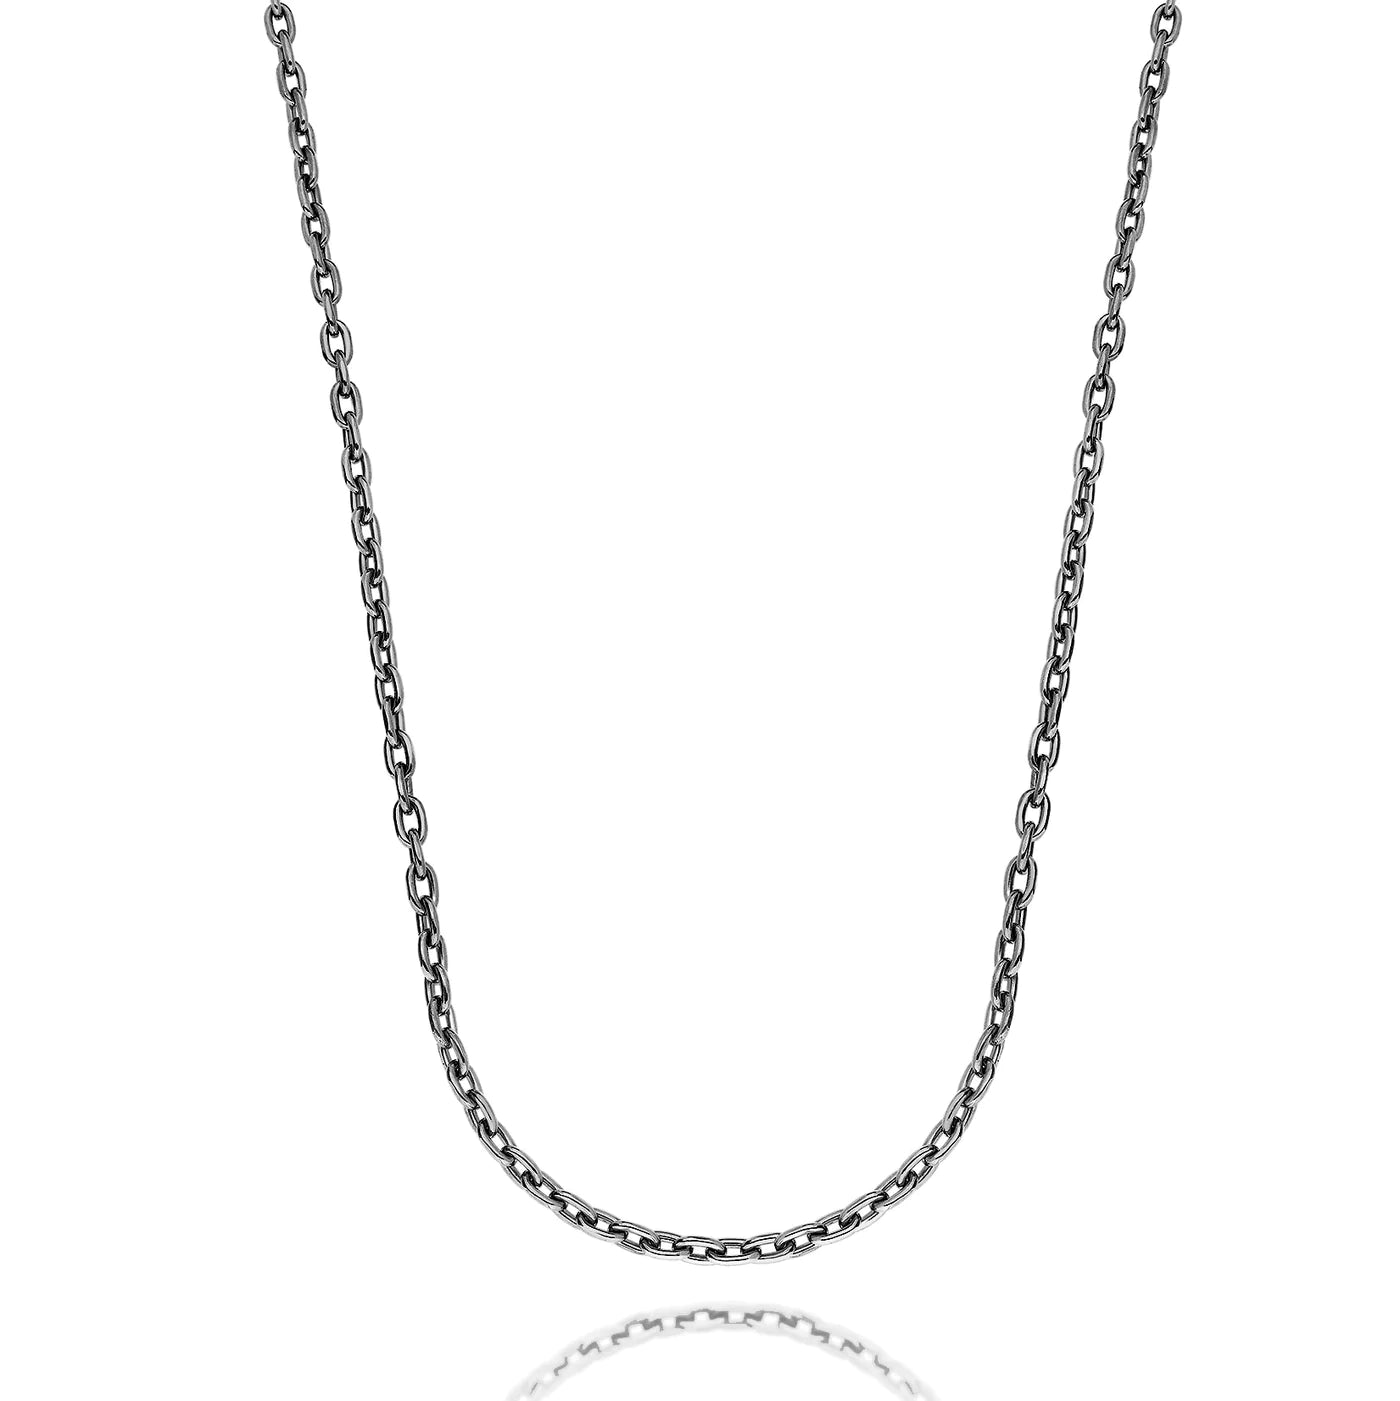 Solid Chain Necklace With Black Rhodium Plated Silver